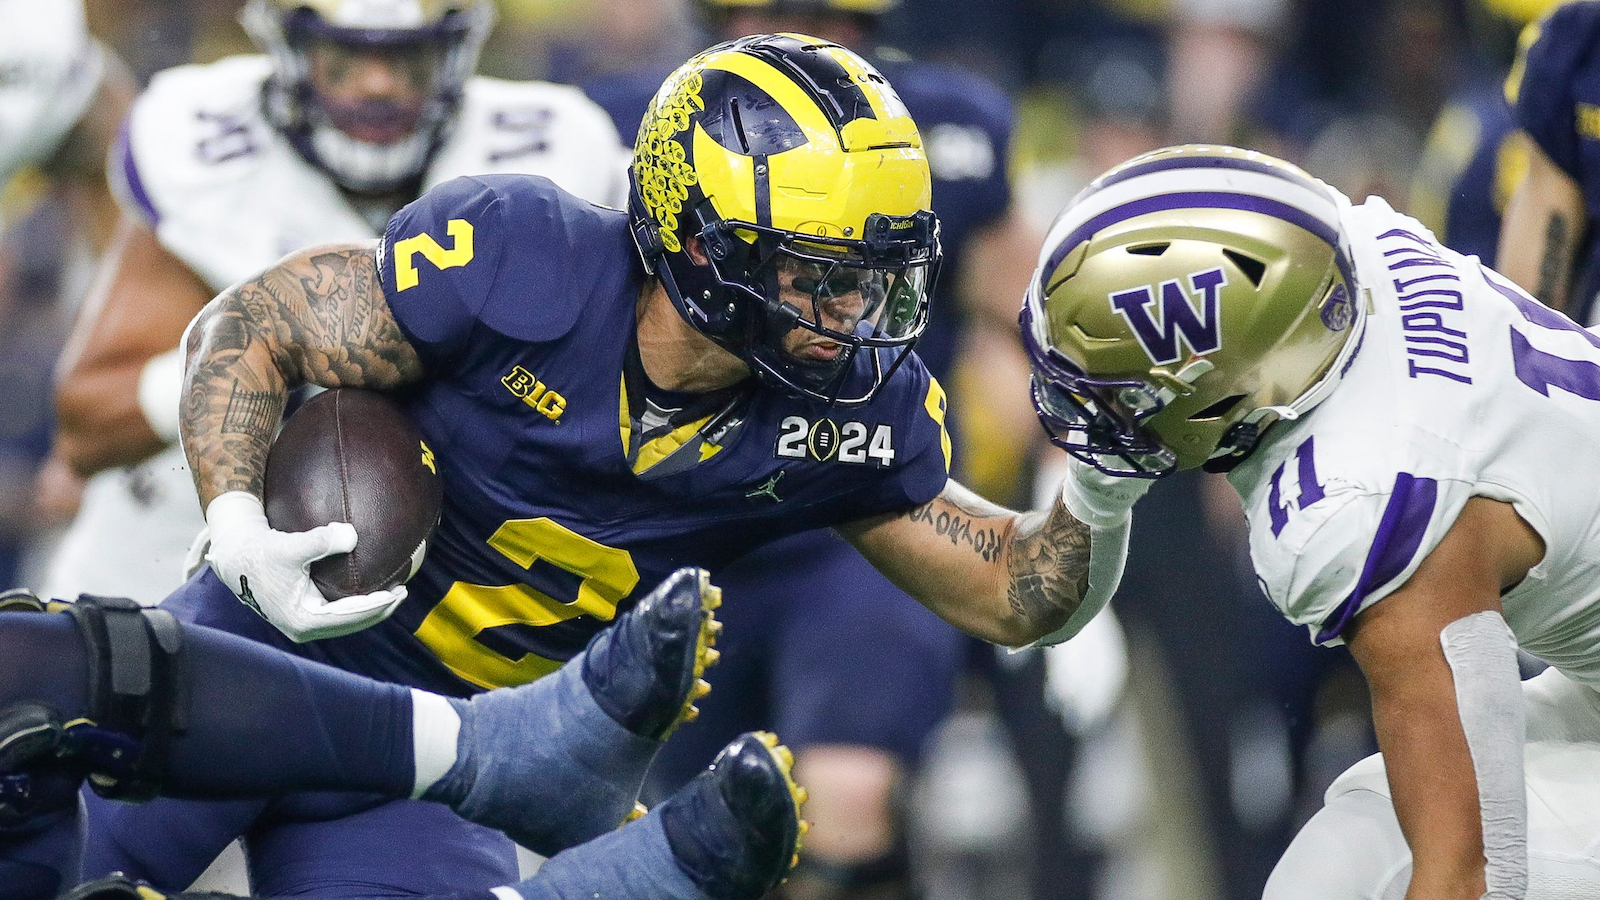 Michigan RB Blake Corum rushes against Washington in the College Football Playoff title game